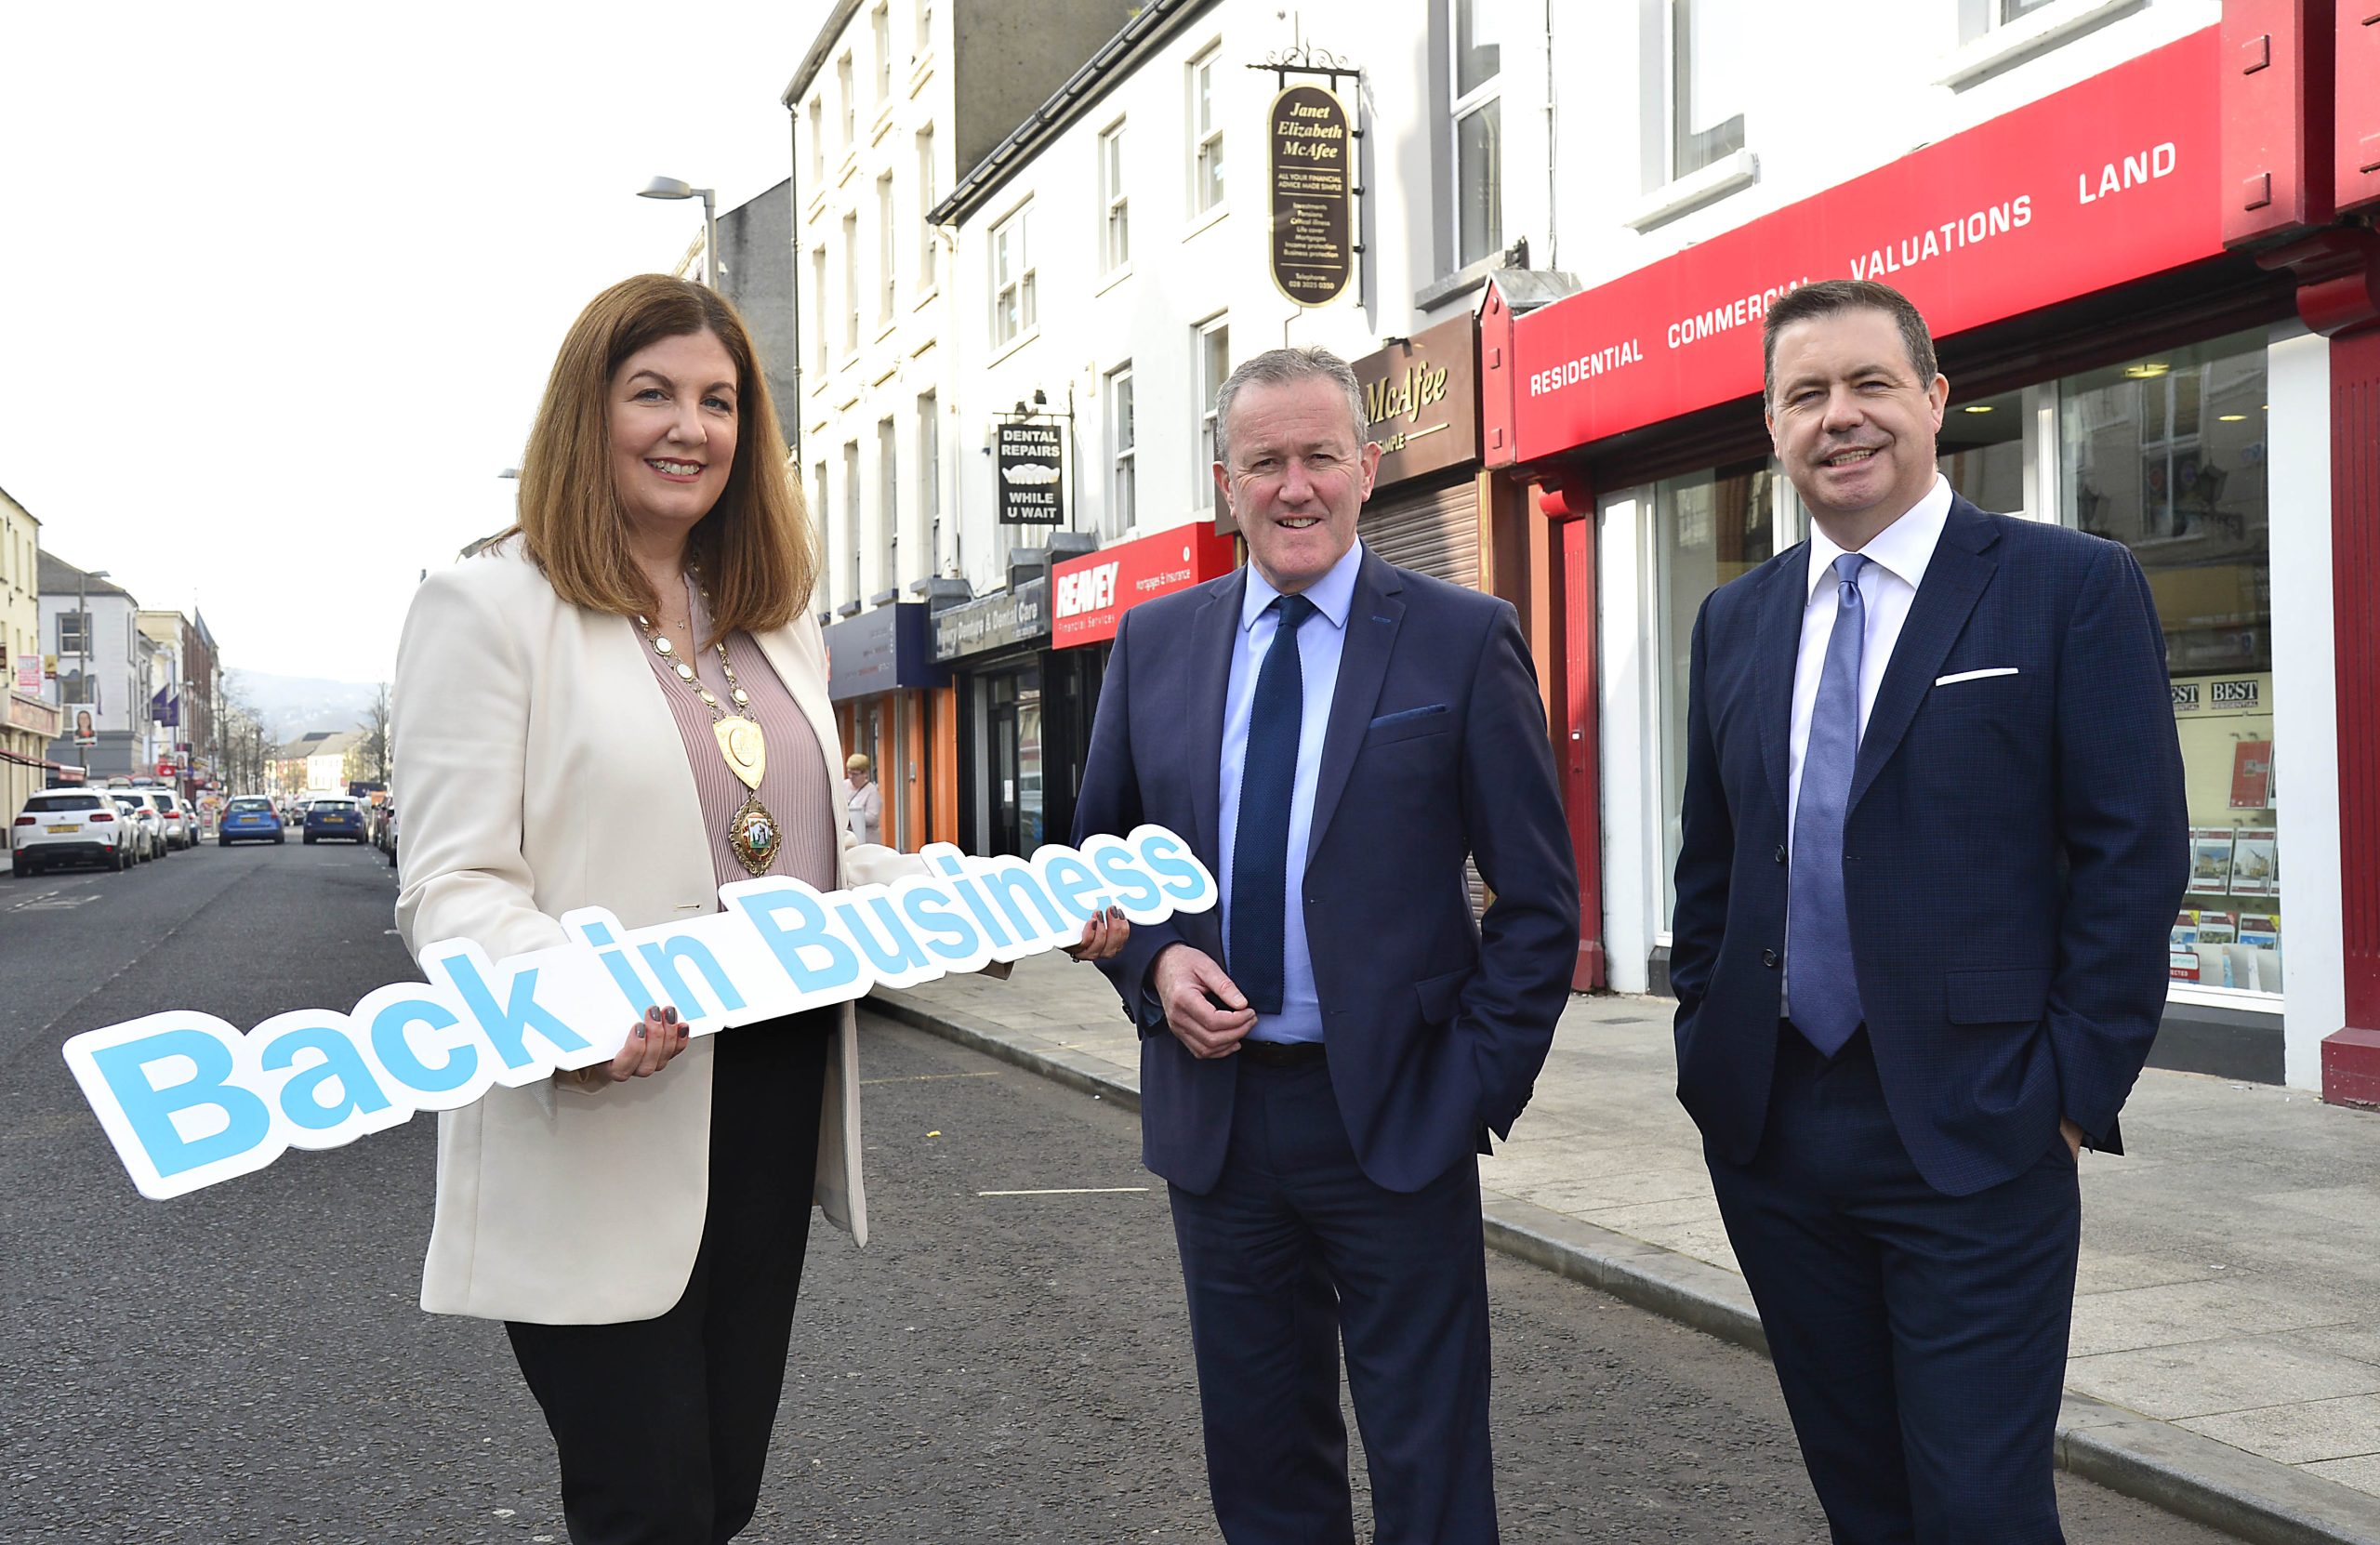 Revamped Back in Business scheme to lure traders back to vacant shops